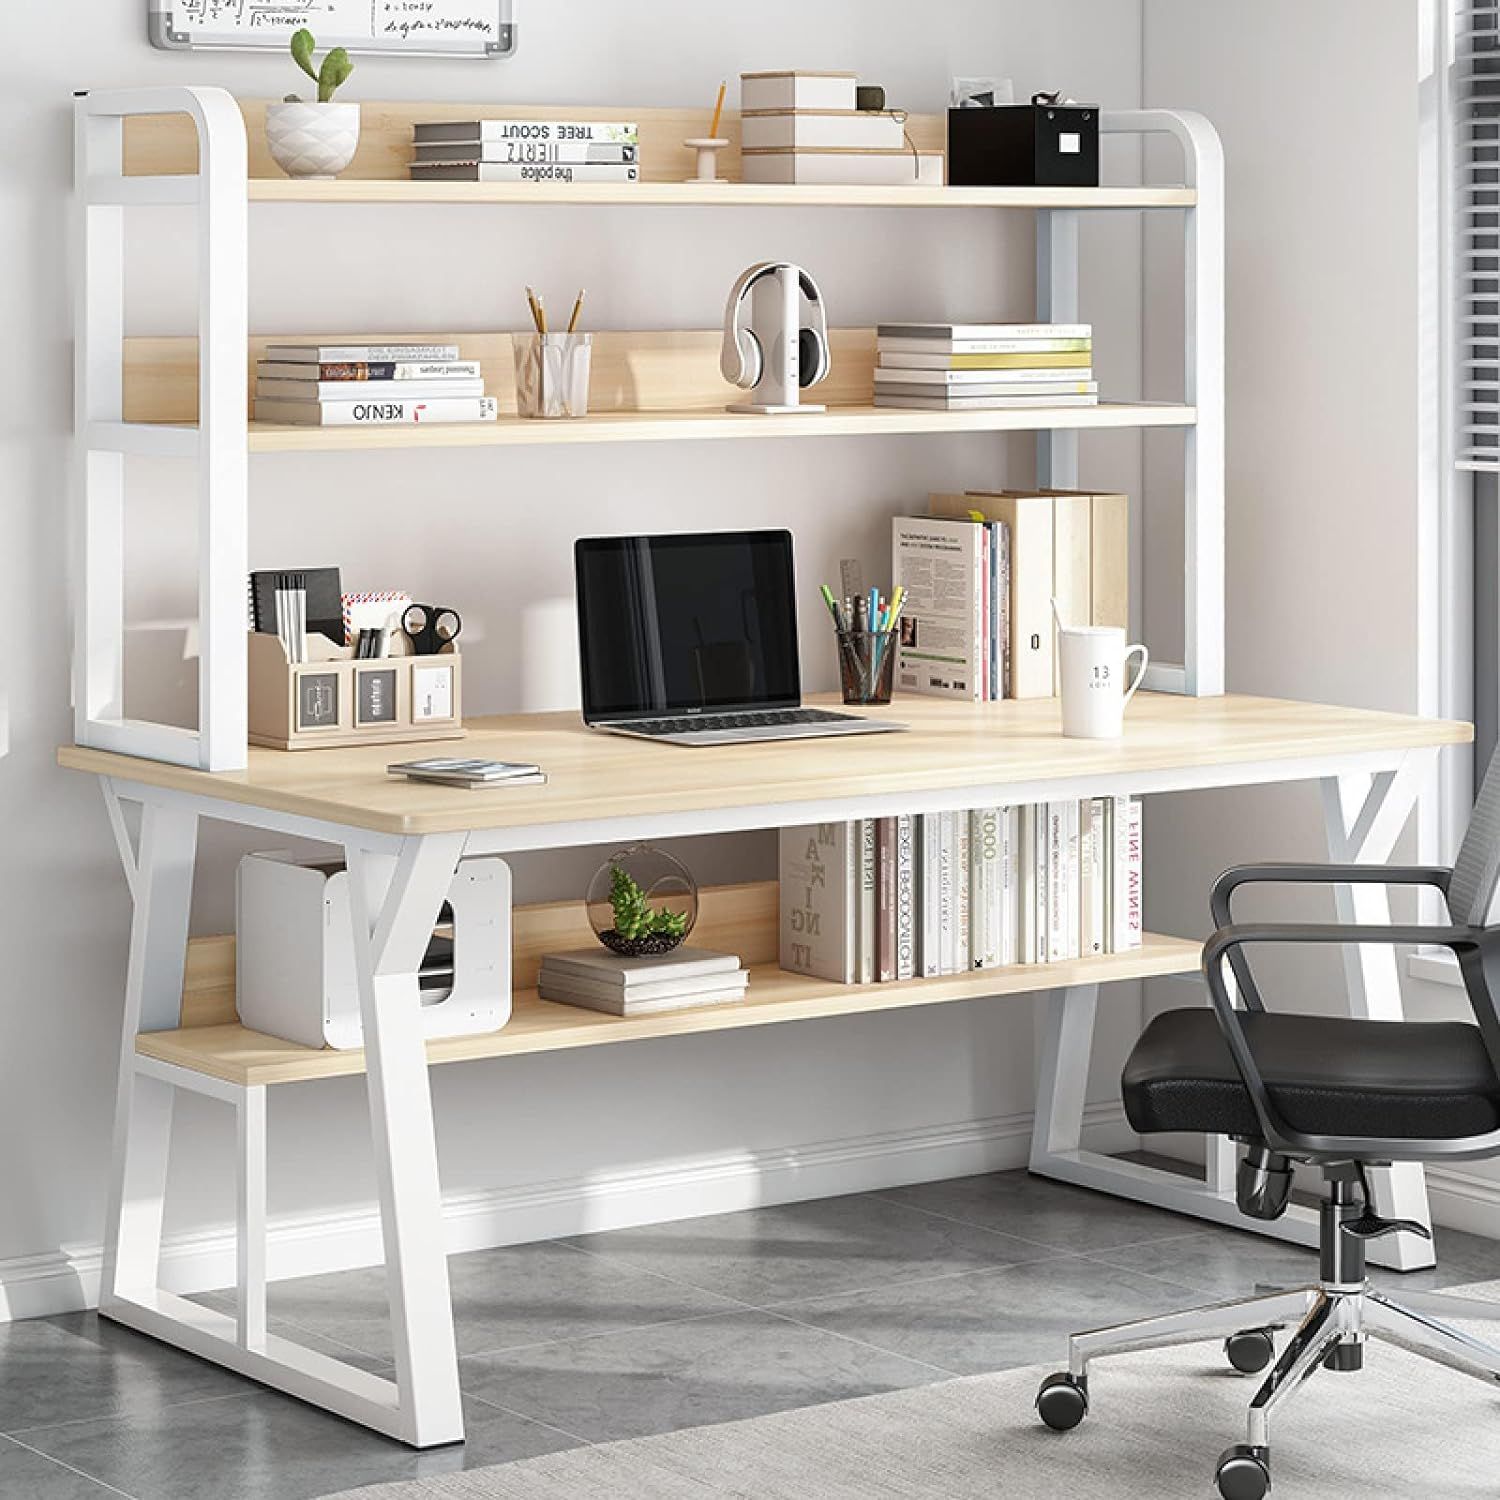 Computer Desk With Storage Shelves And Bookshelf Modern Simple Desk With Sturdy Metal Frame Writing Study Workstation For Office And Home Size 31 Inch